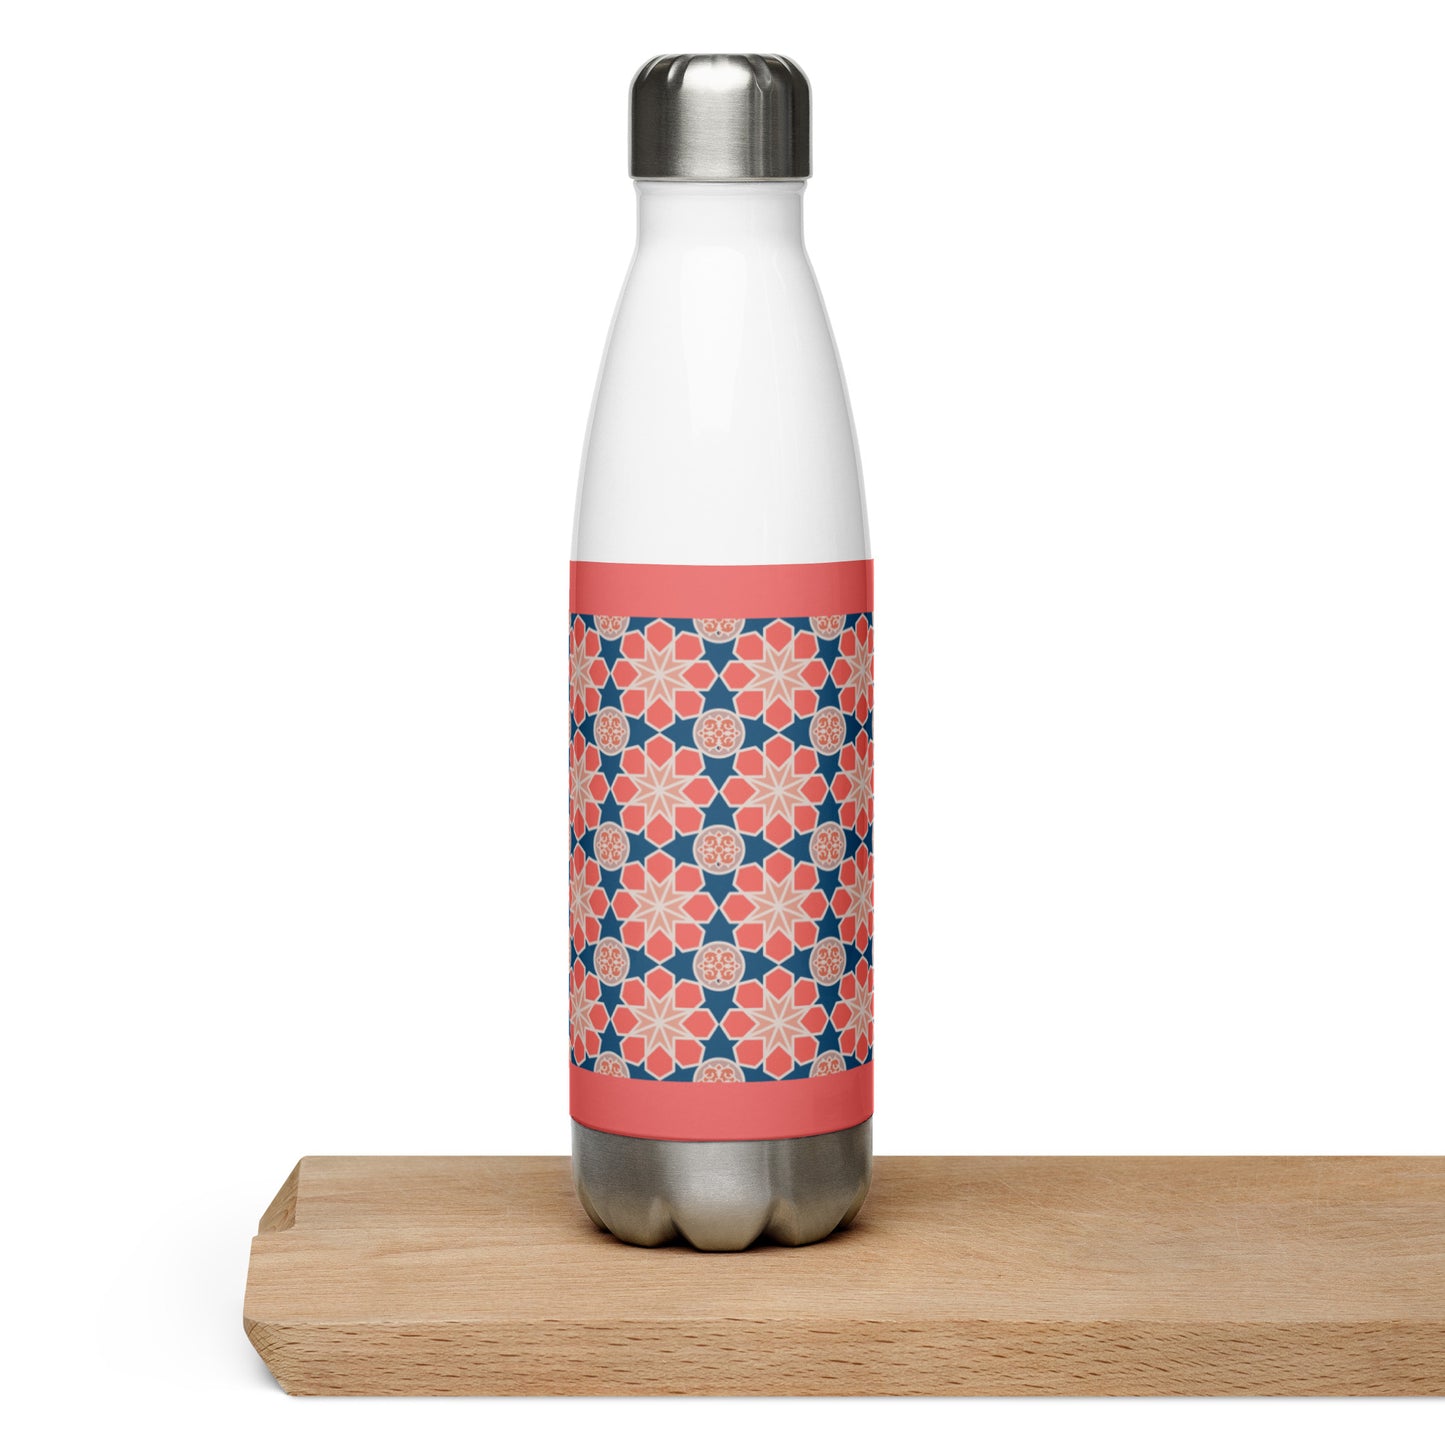 Stainless Steel Water Bottle - Geometric Arabesque Mashup in Pink